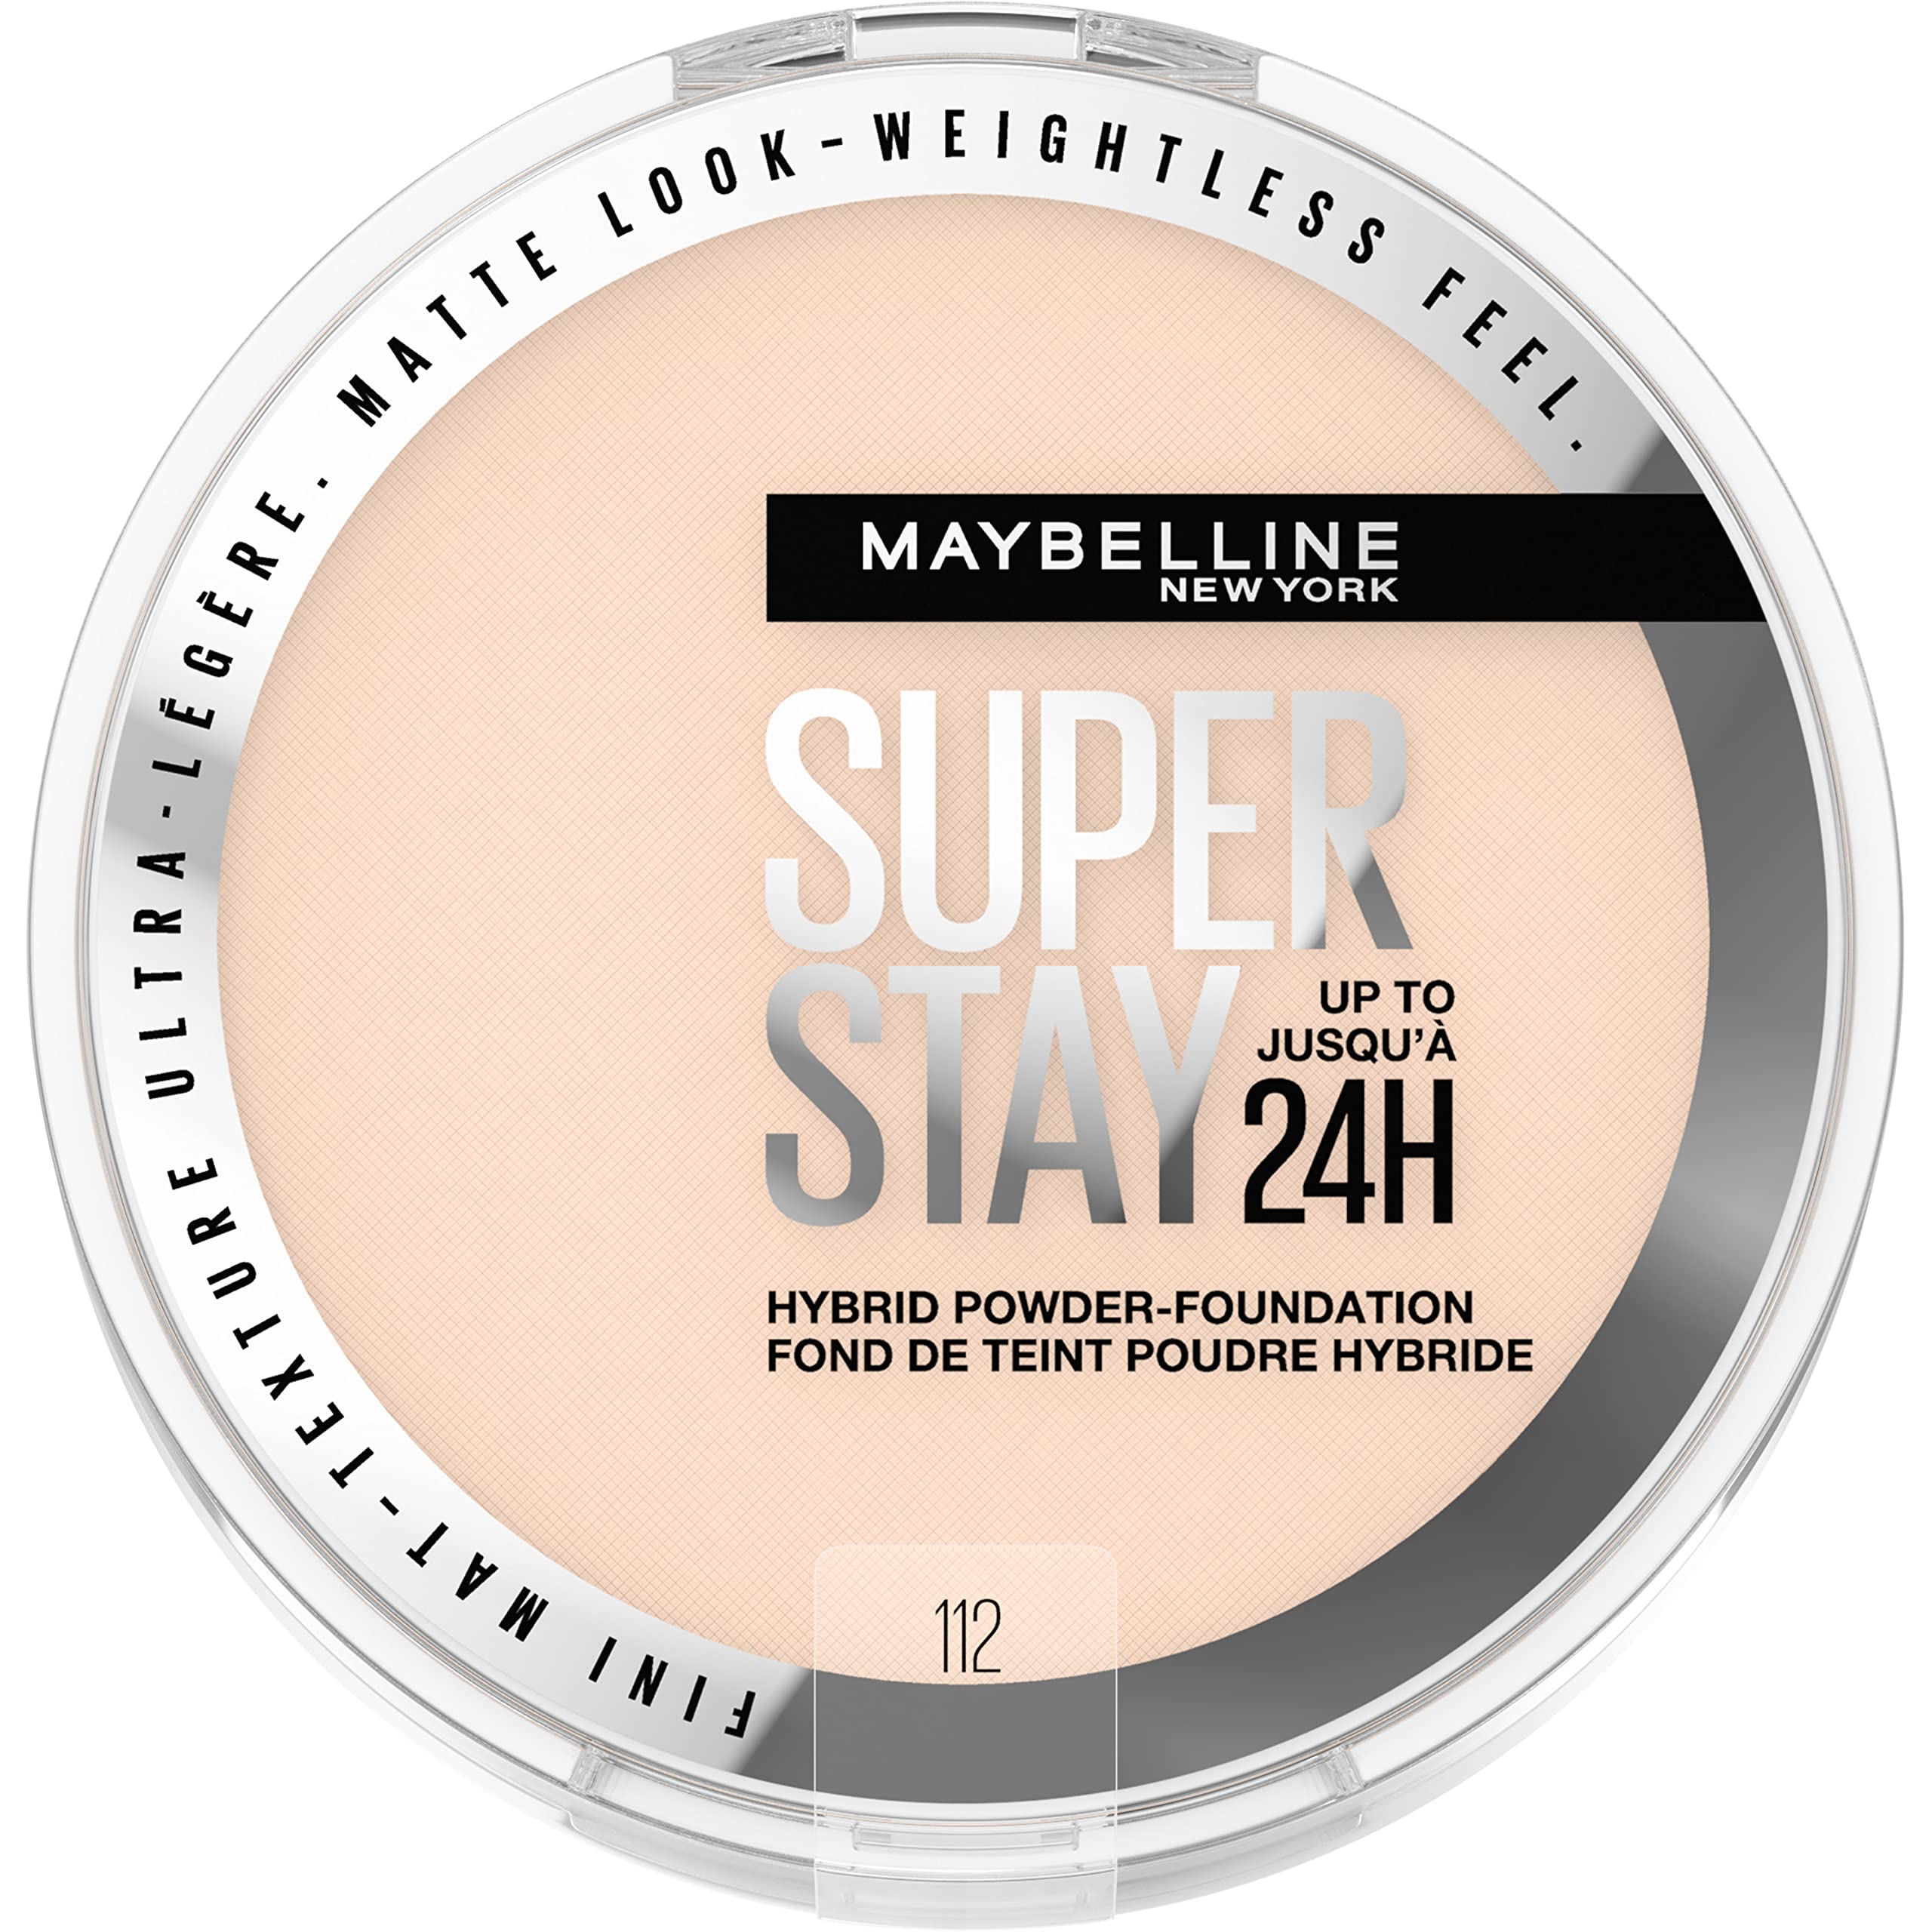 Maybelline New York Super Stay Up to 24HR Hybrid Powder-Foundation, Medium-to-Full Coverage Makeup, Matte Finish, 112, 1 Count